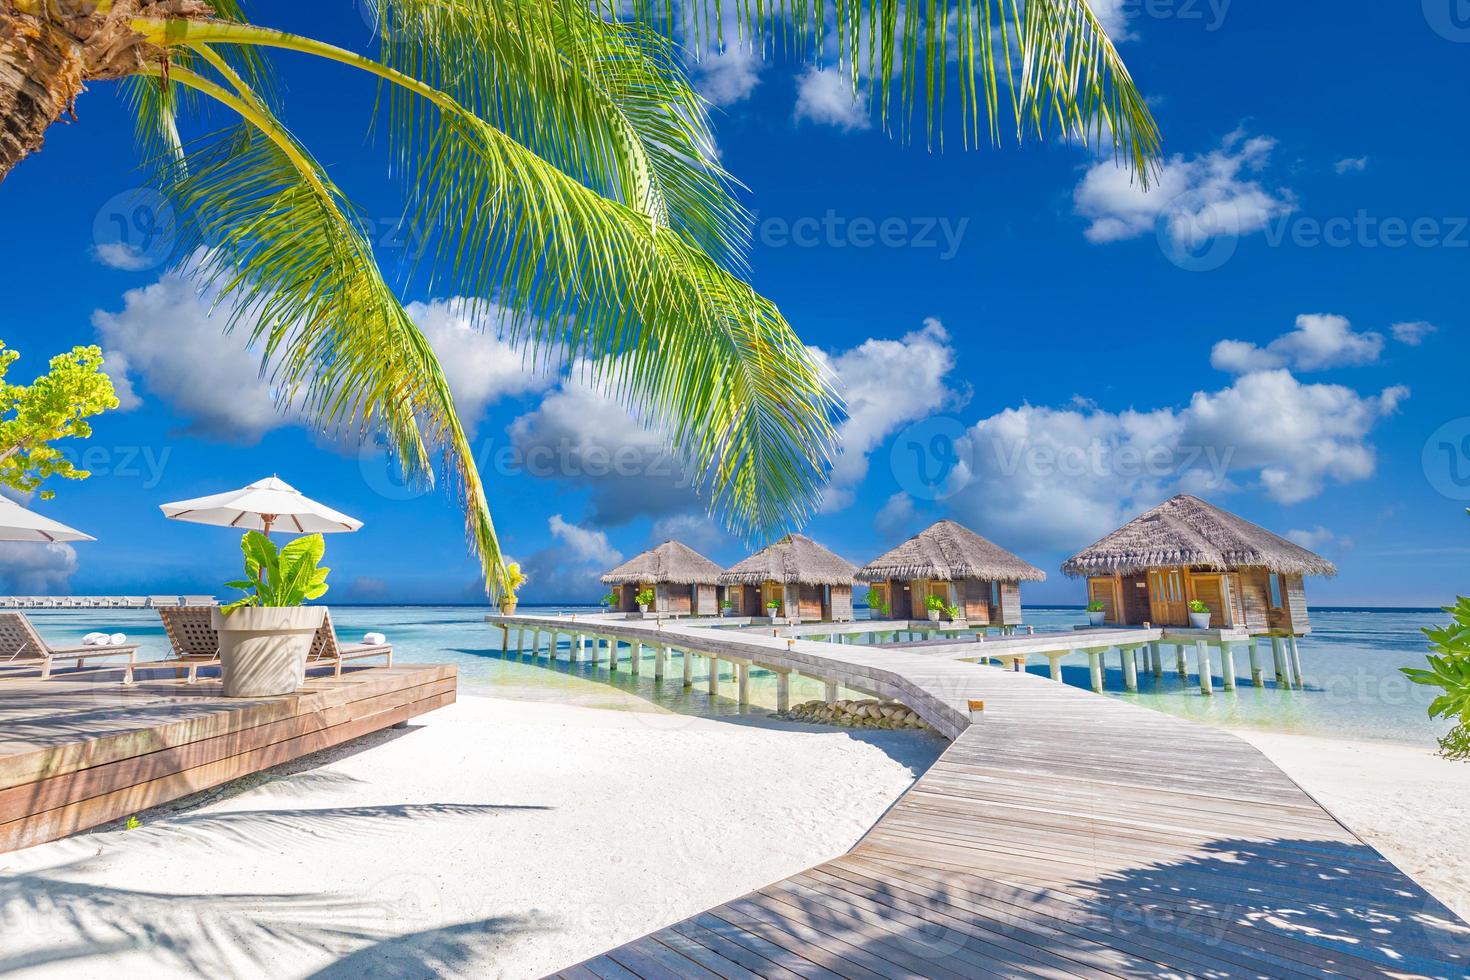 Luxury hotel or resort on a tropical beach, water villas, bungalows wooden jetty. Luxury spa and well being background. Summer paradise island, exotic travel landscape, seascape photo